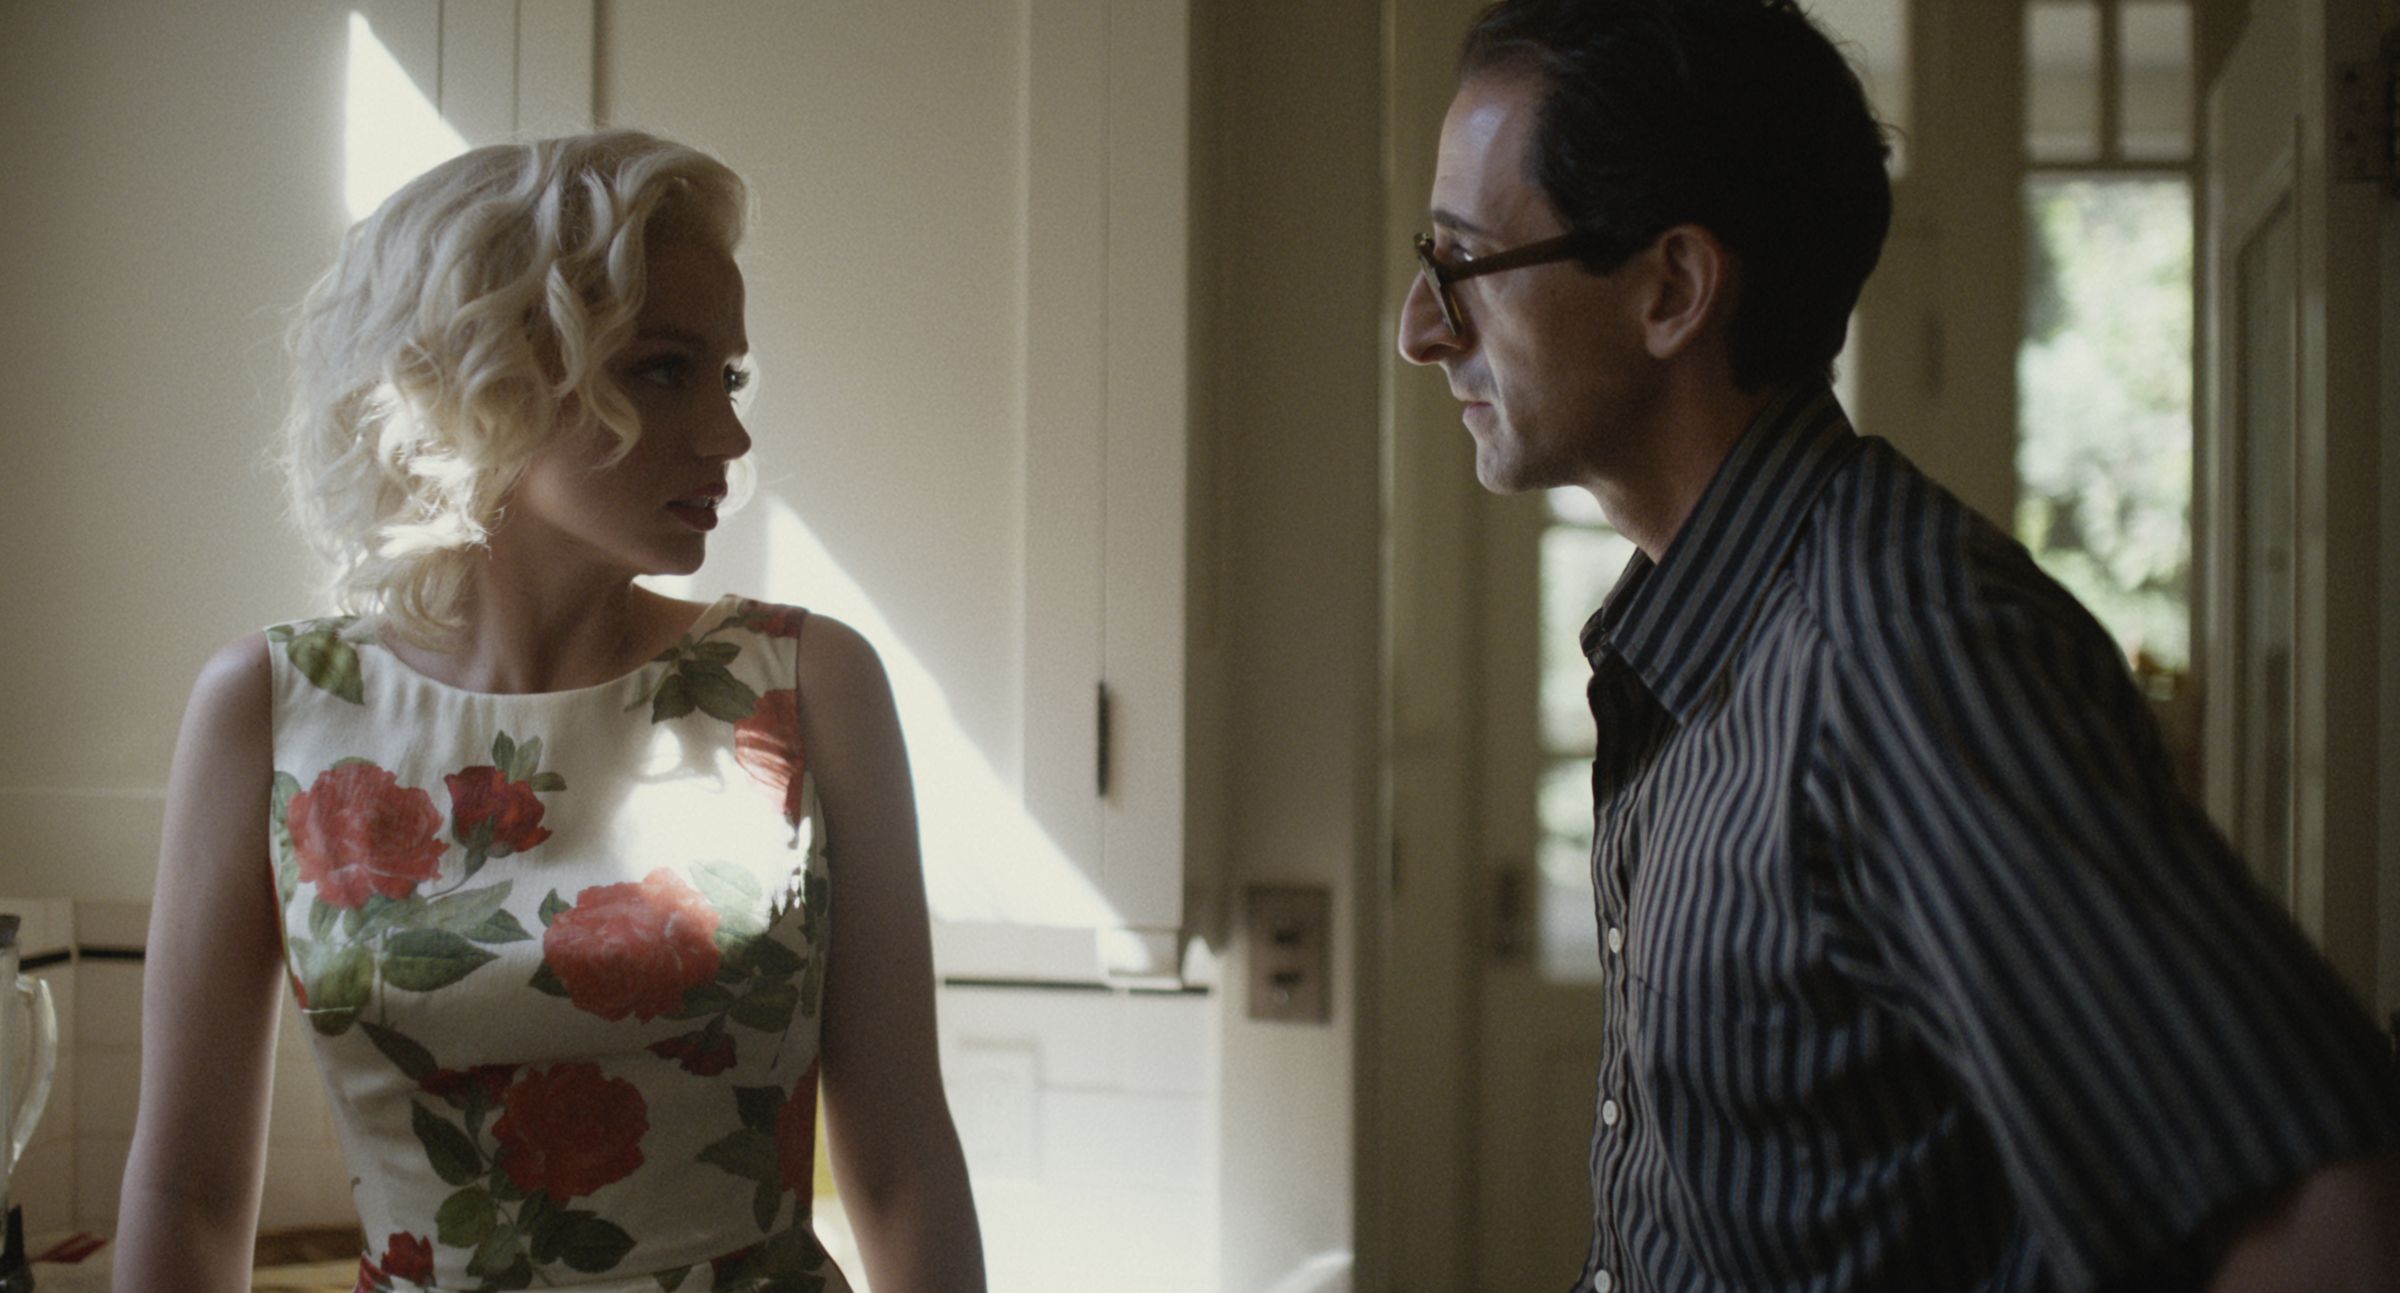 A blonde woman in a floral dress looking over in concern at a dark haired bespectacled man wearing a pinstripe shirt. The pair are standing in a well-lit but sparse kitchen.